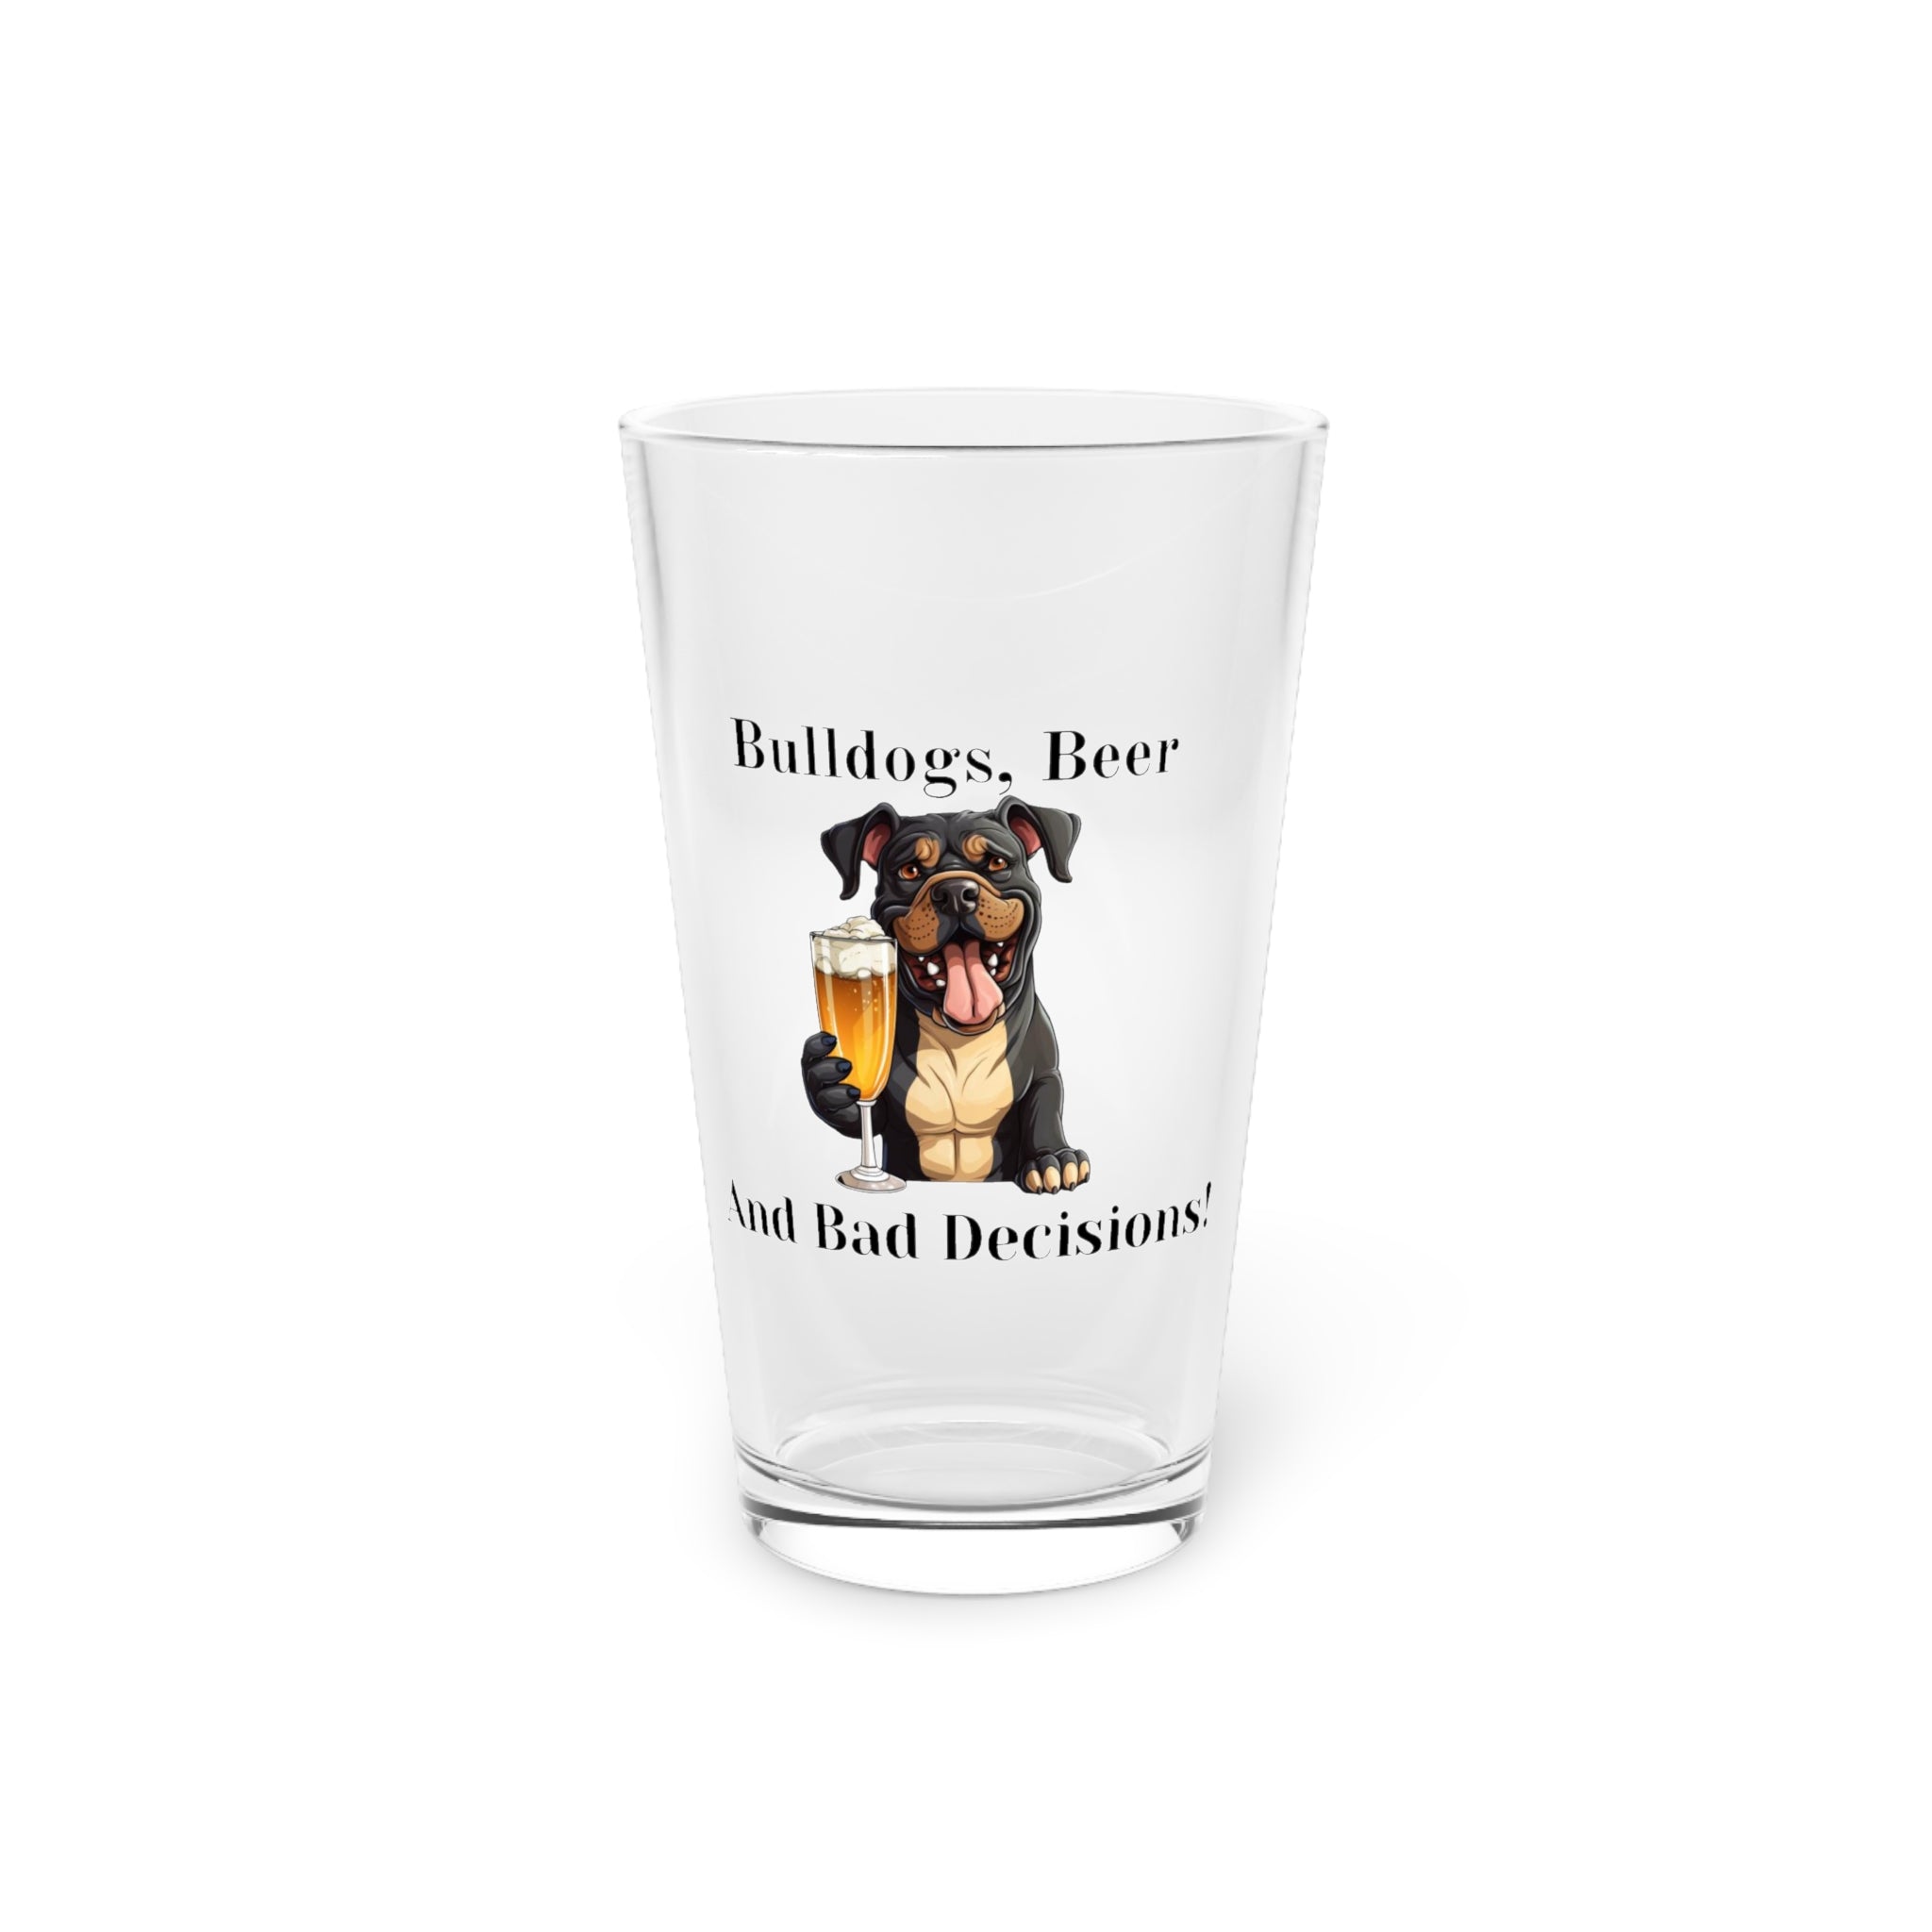 Bulldogs, Beer and Bad Decisions - Tipsy Bully Pint Glass (American/Black)